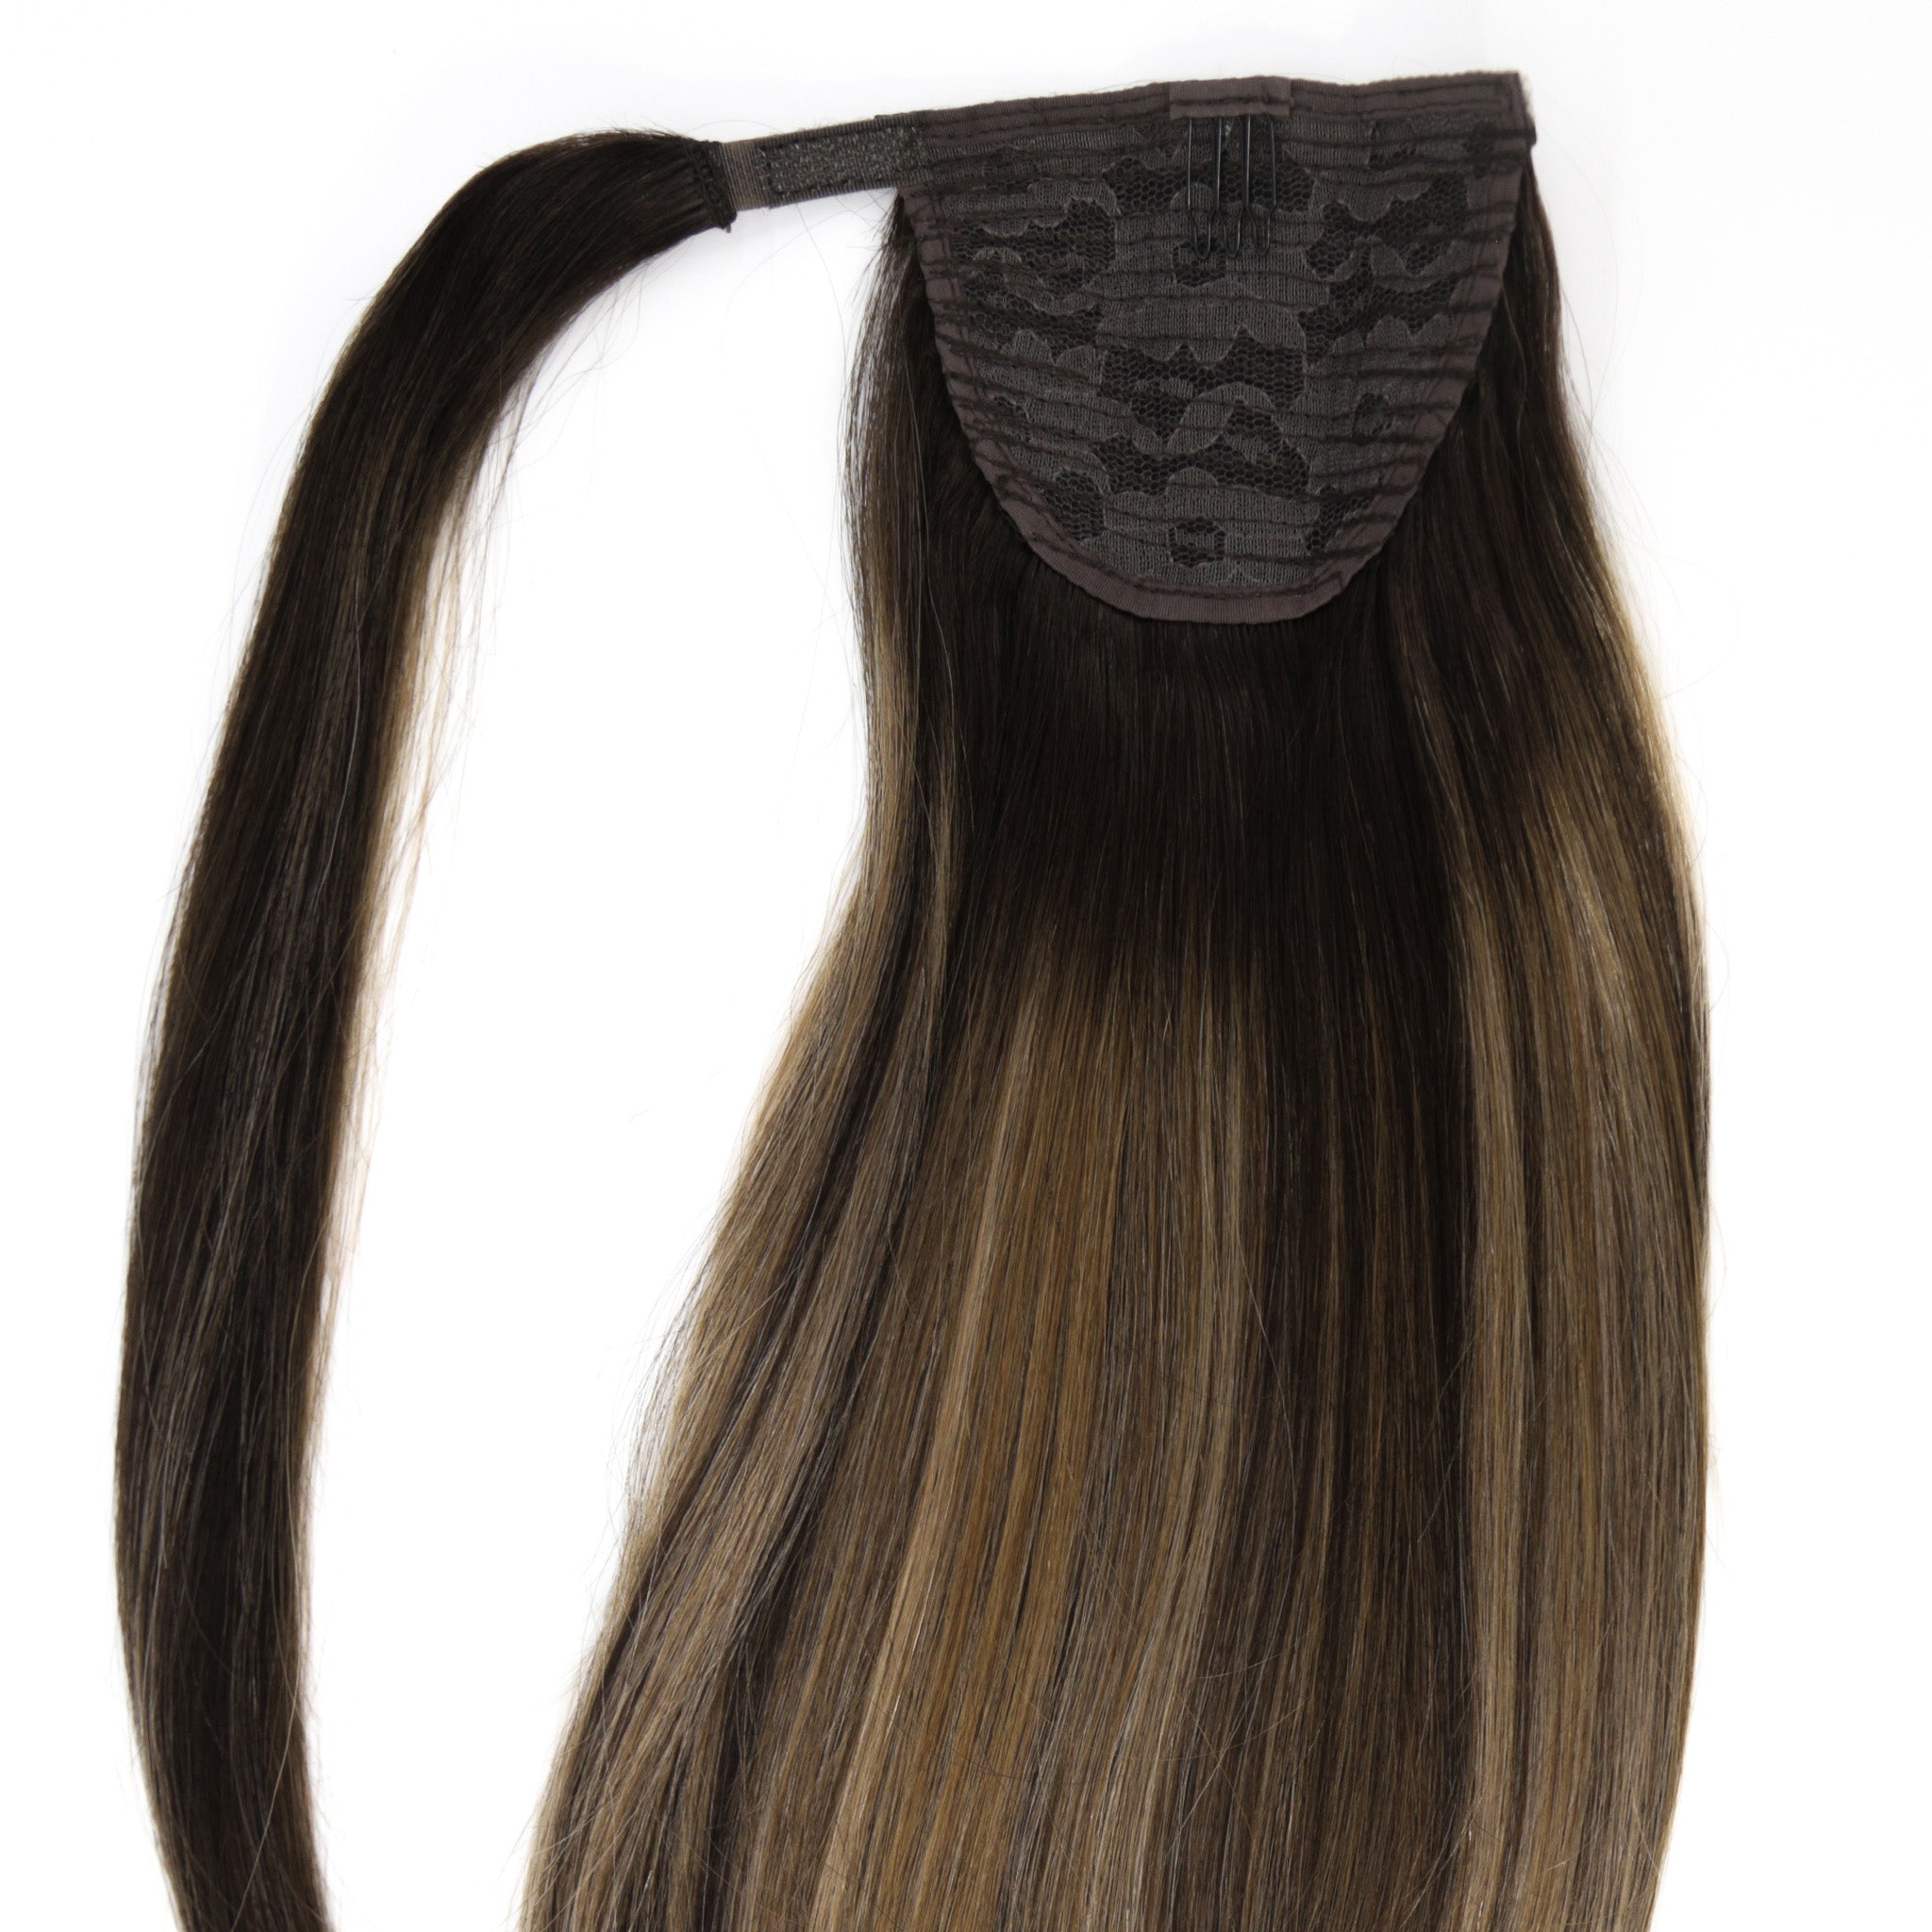 Pacific Balayage Ponytail Hair Extension